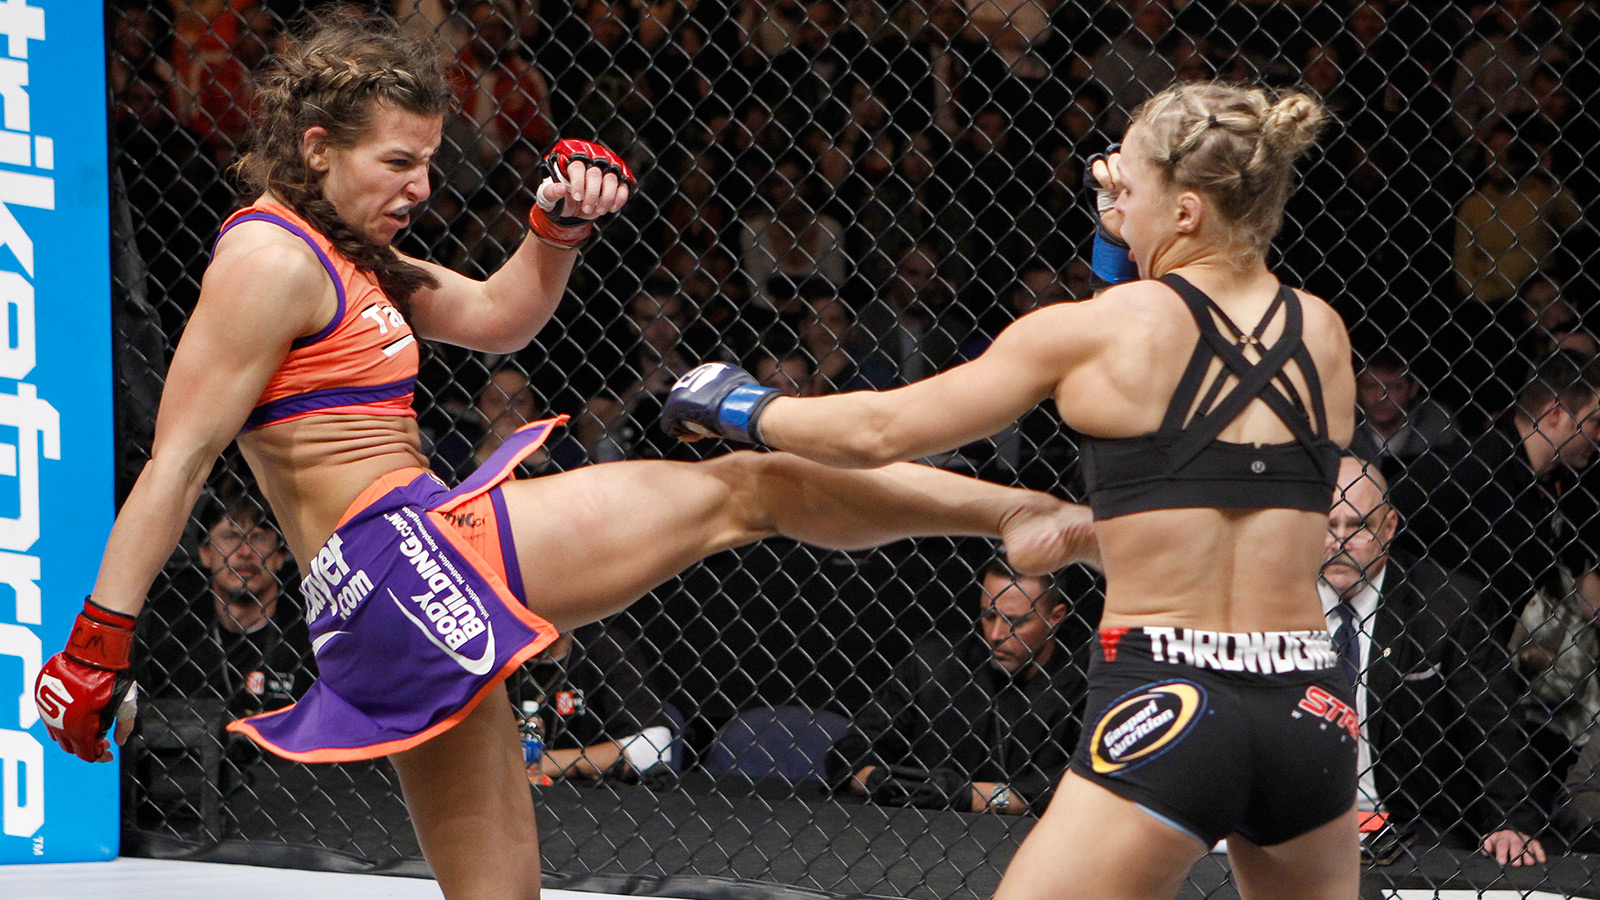 COLUMBUS, OH - MARCH 03: (L-R) Miesha Tate kicks Ronda Rousey during the Strikeforce event at Nationwide Arena on March 3, 2012 in Columbus, Ohio. (Photo by Esther Lin/Forza LLC/Forza LLC via Getty Images) *** Local Caption *** Miesha Tate; Ronda Rousey